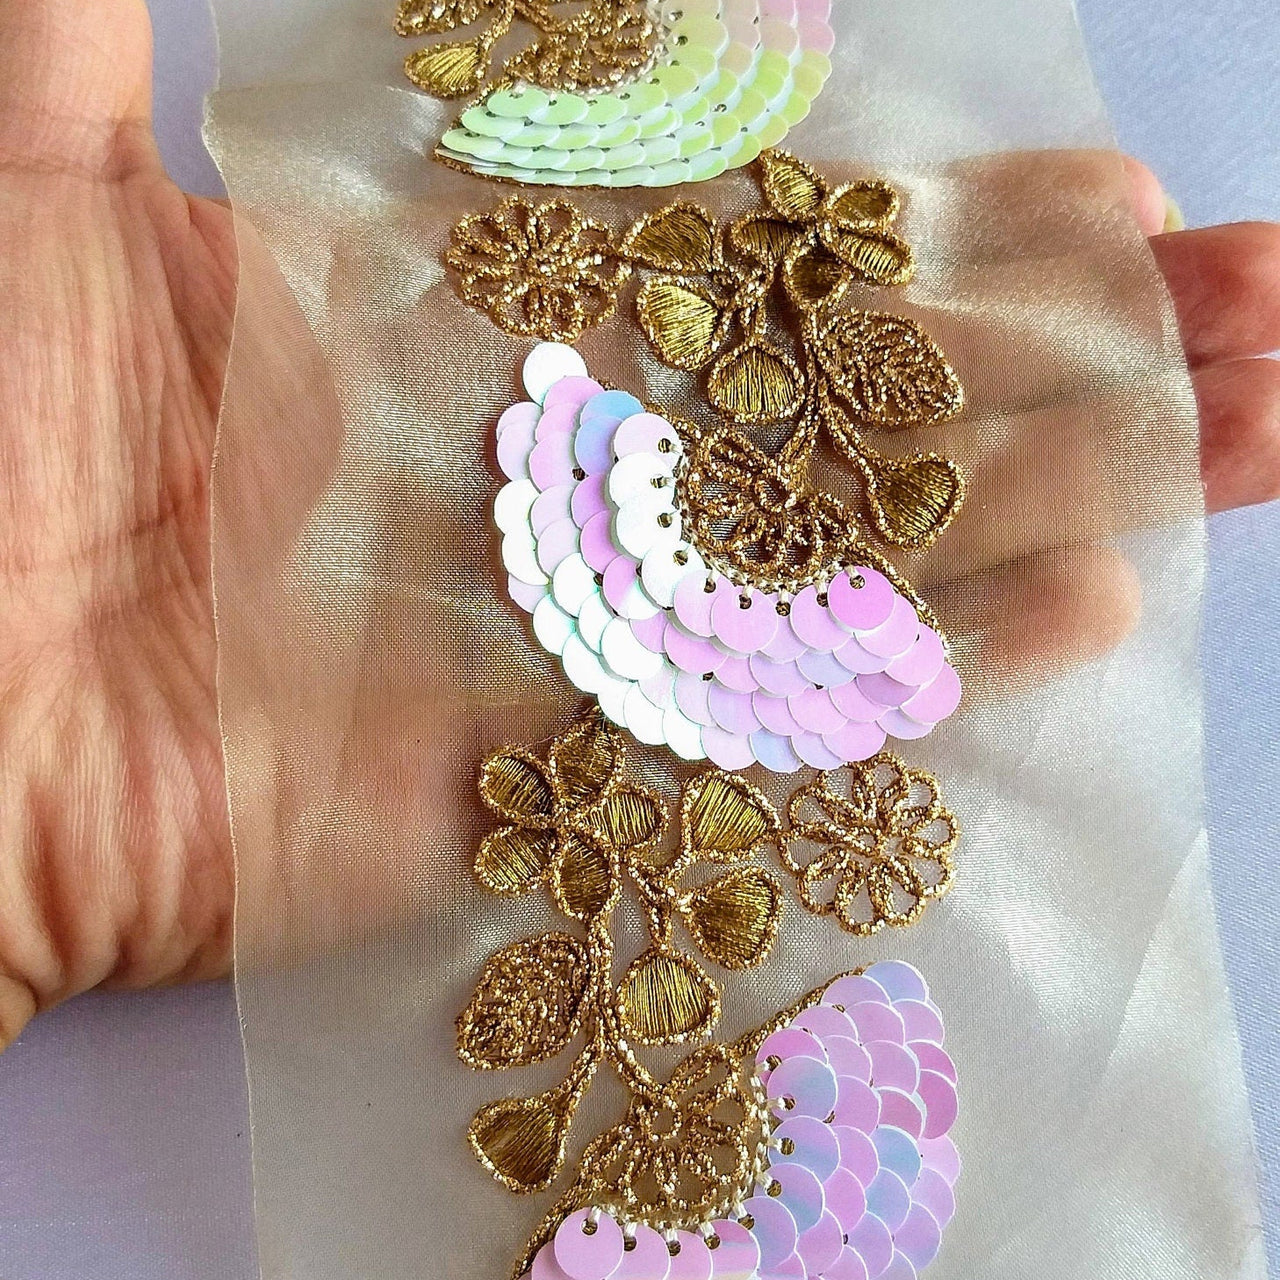 Gold Sheer Fabric Trim With Antique Gold Floral Embroidery And Pink White Two Tone Sequins Embellishments, Approx. 95mm Wide - 210119L124